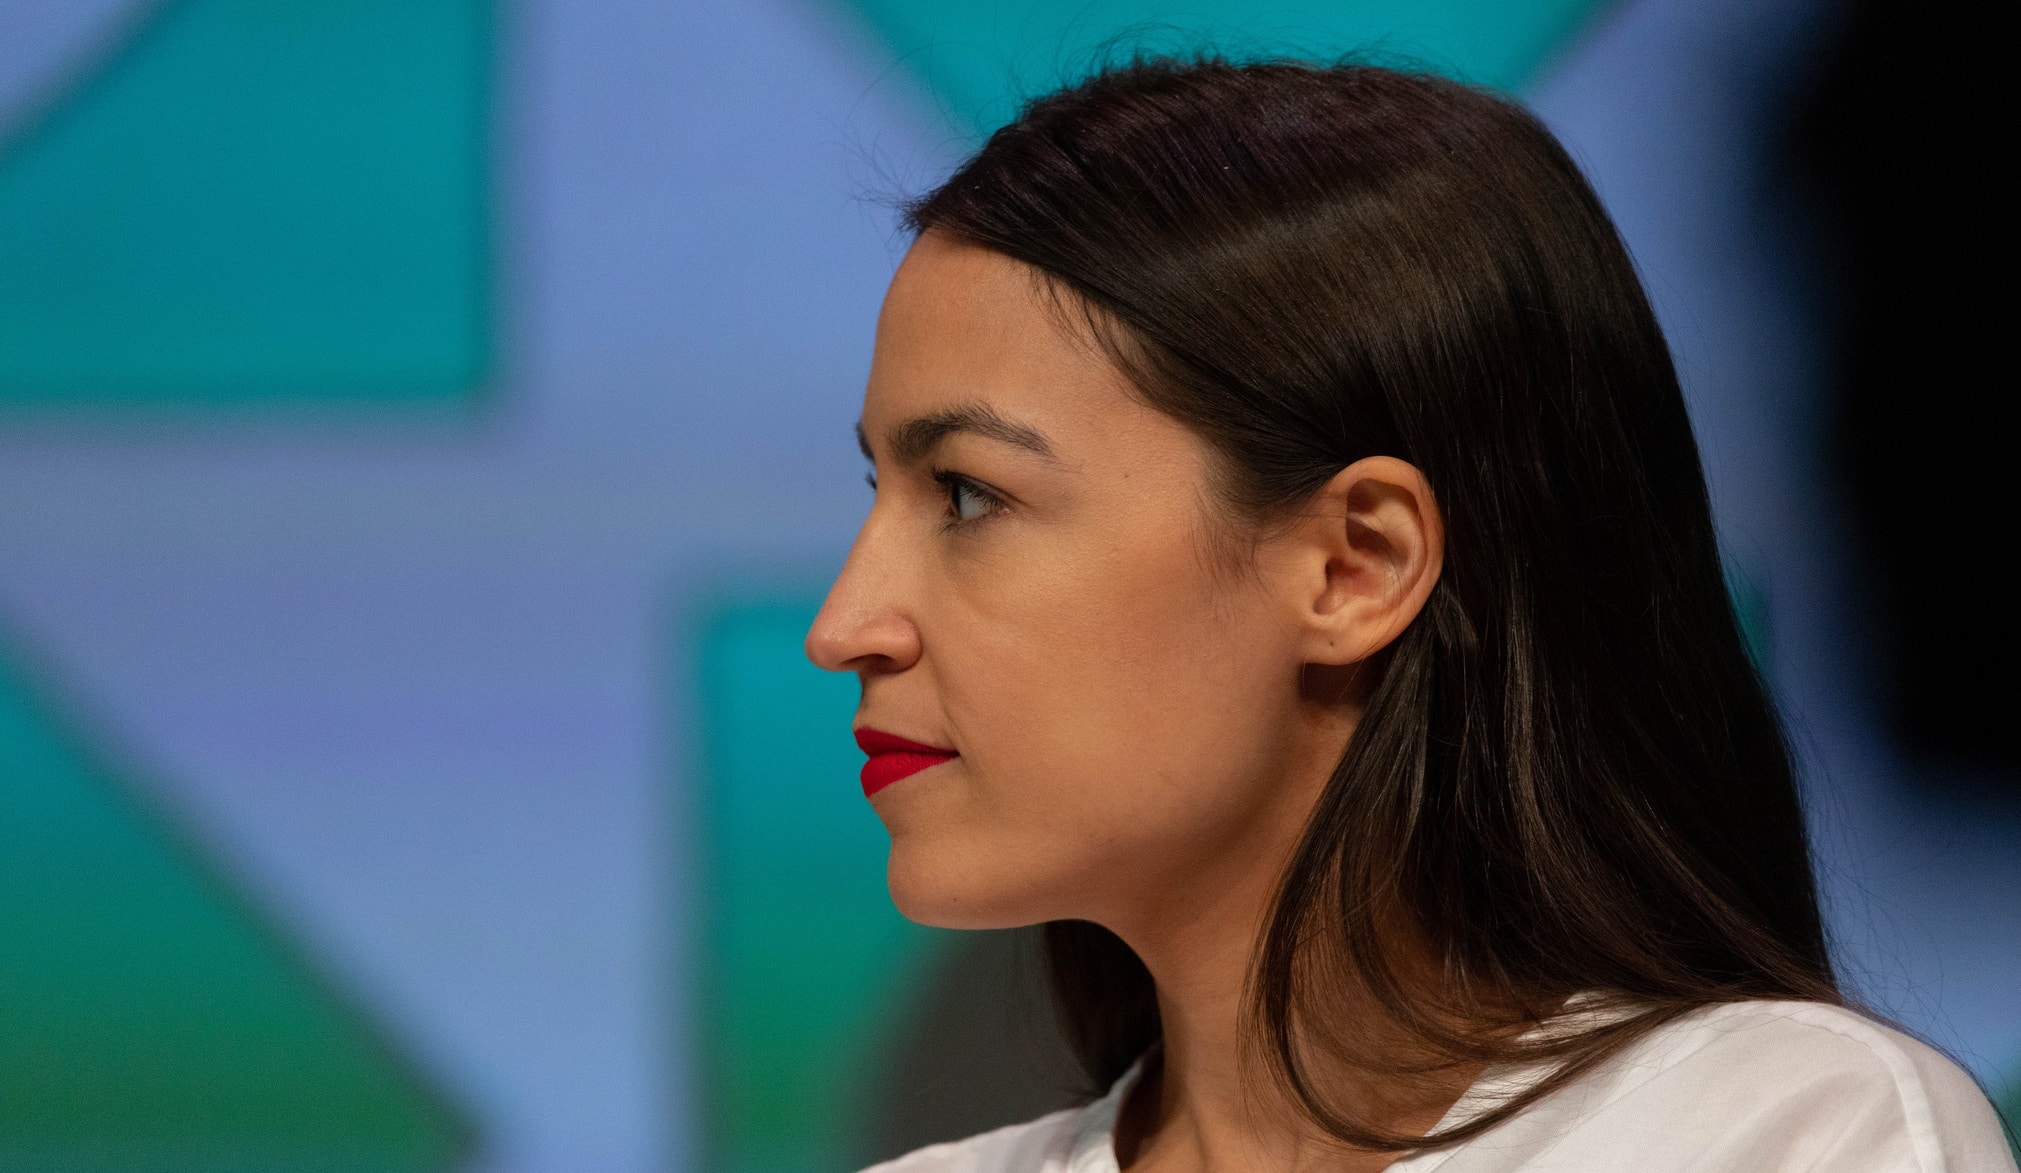 Ocasio-Cortez receives threats. The police taught her assistants to security measures